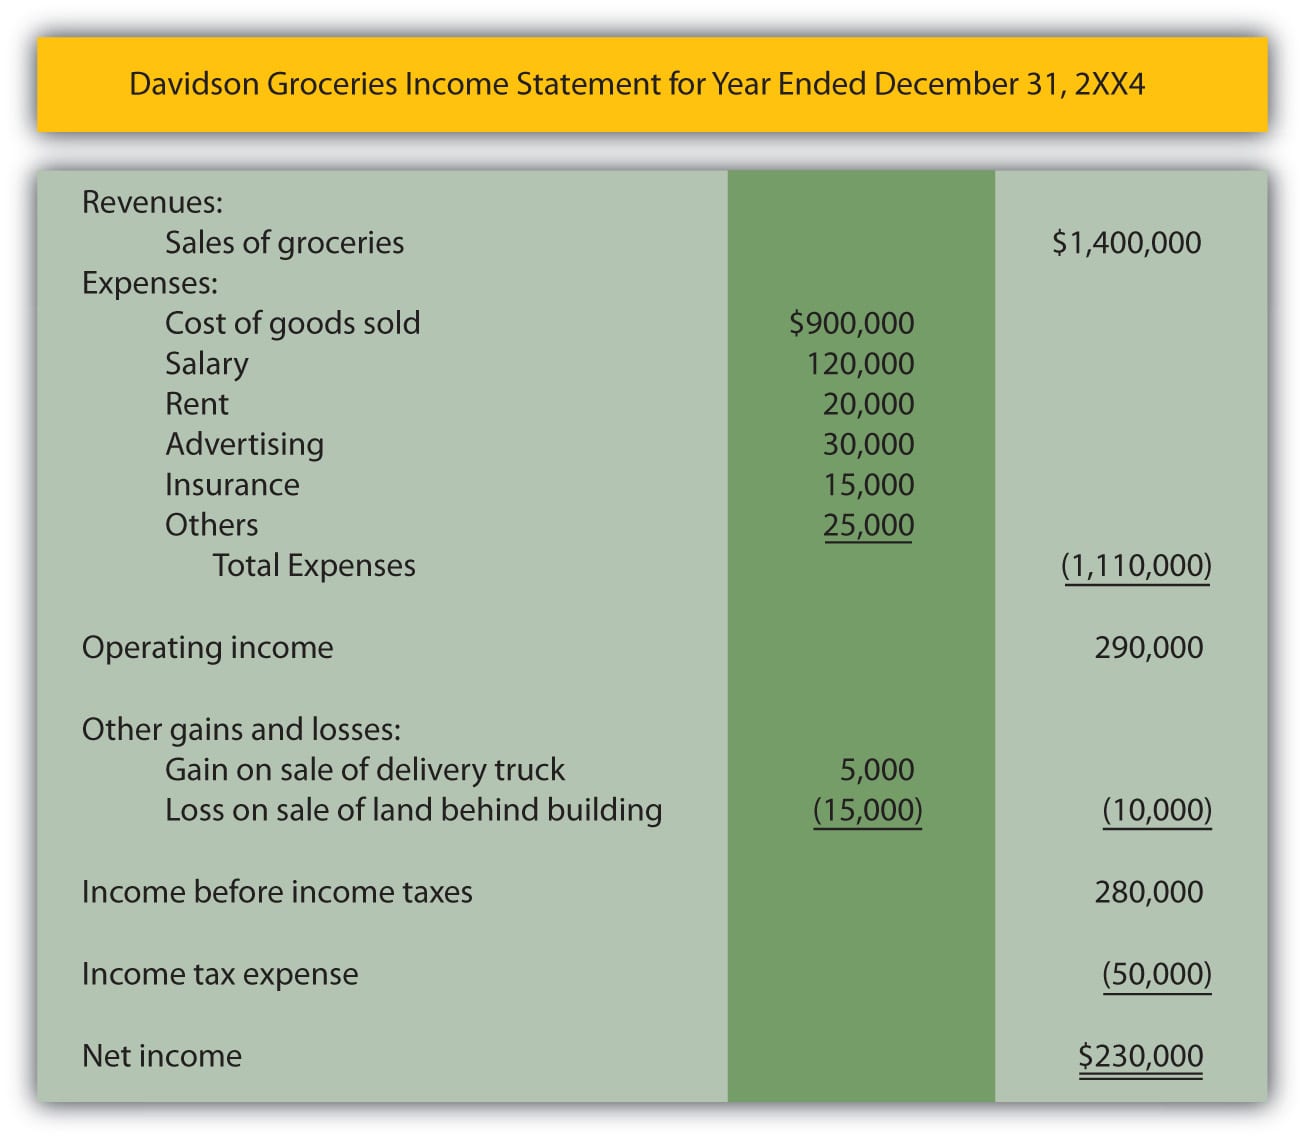 Simple Income Statement Format